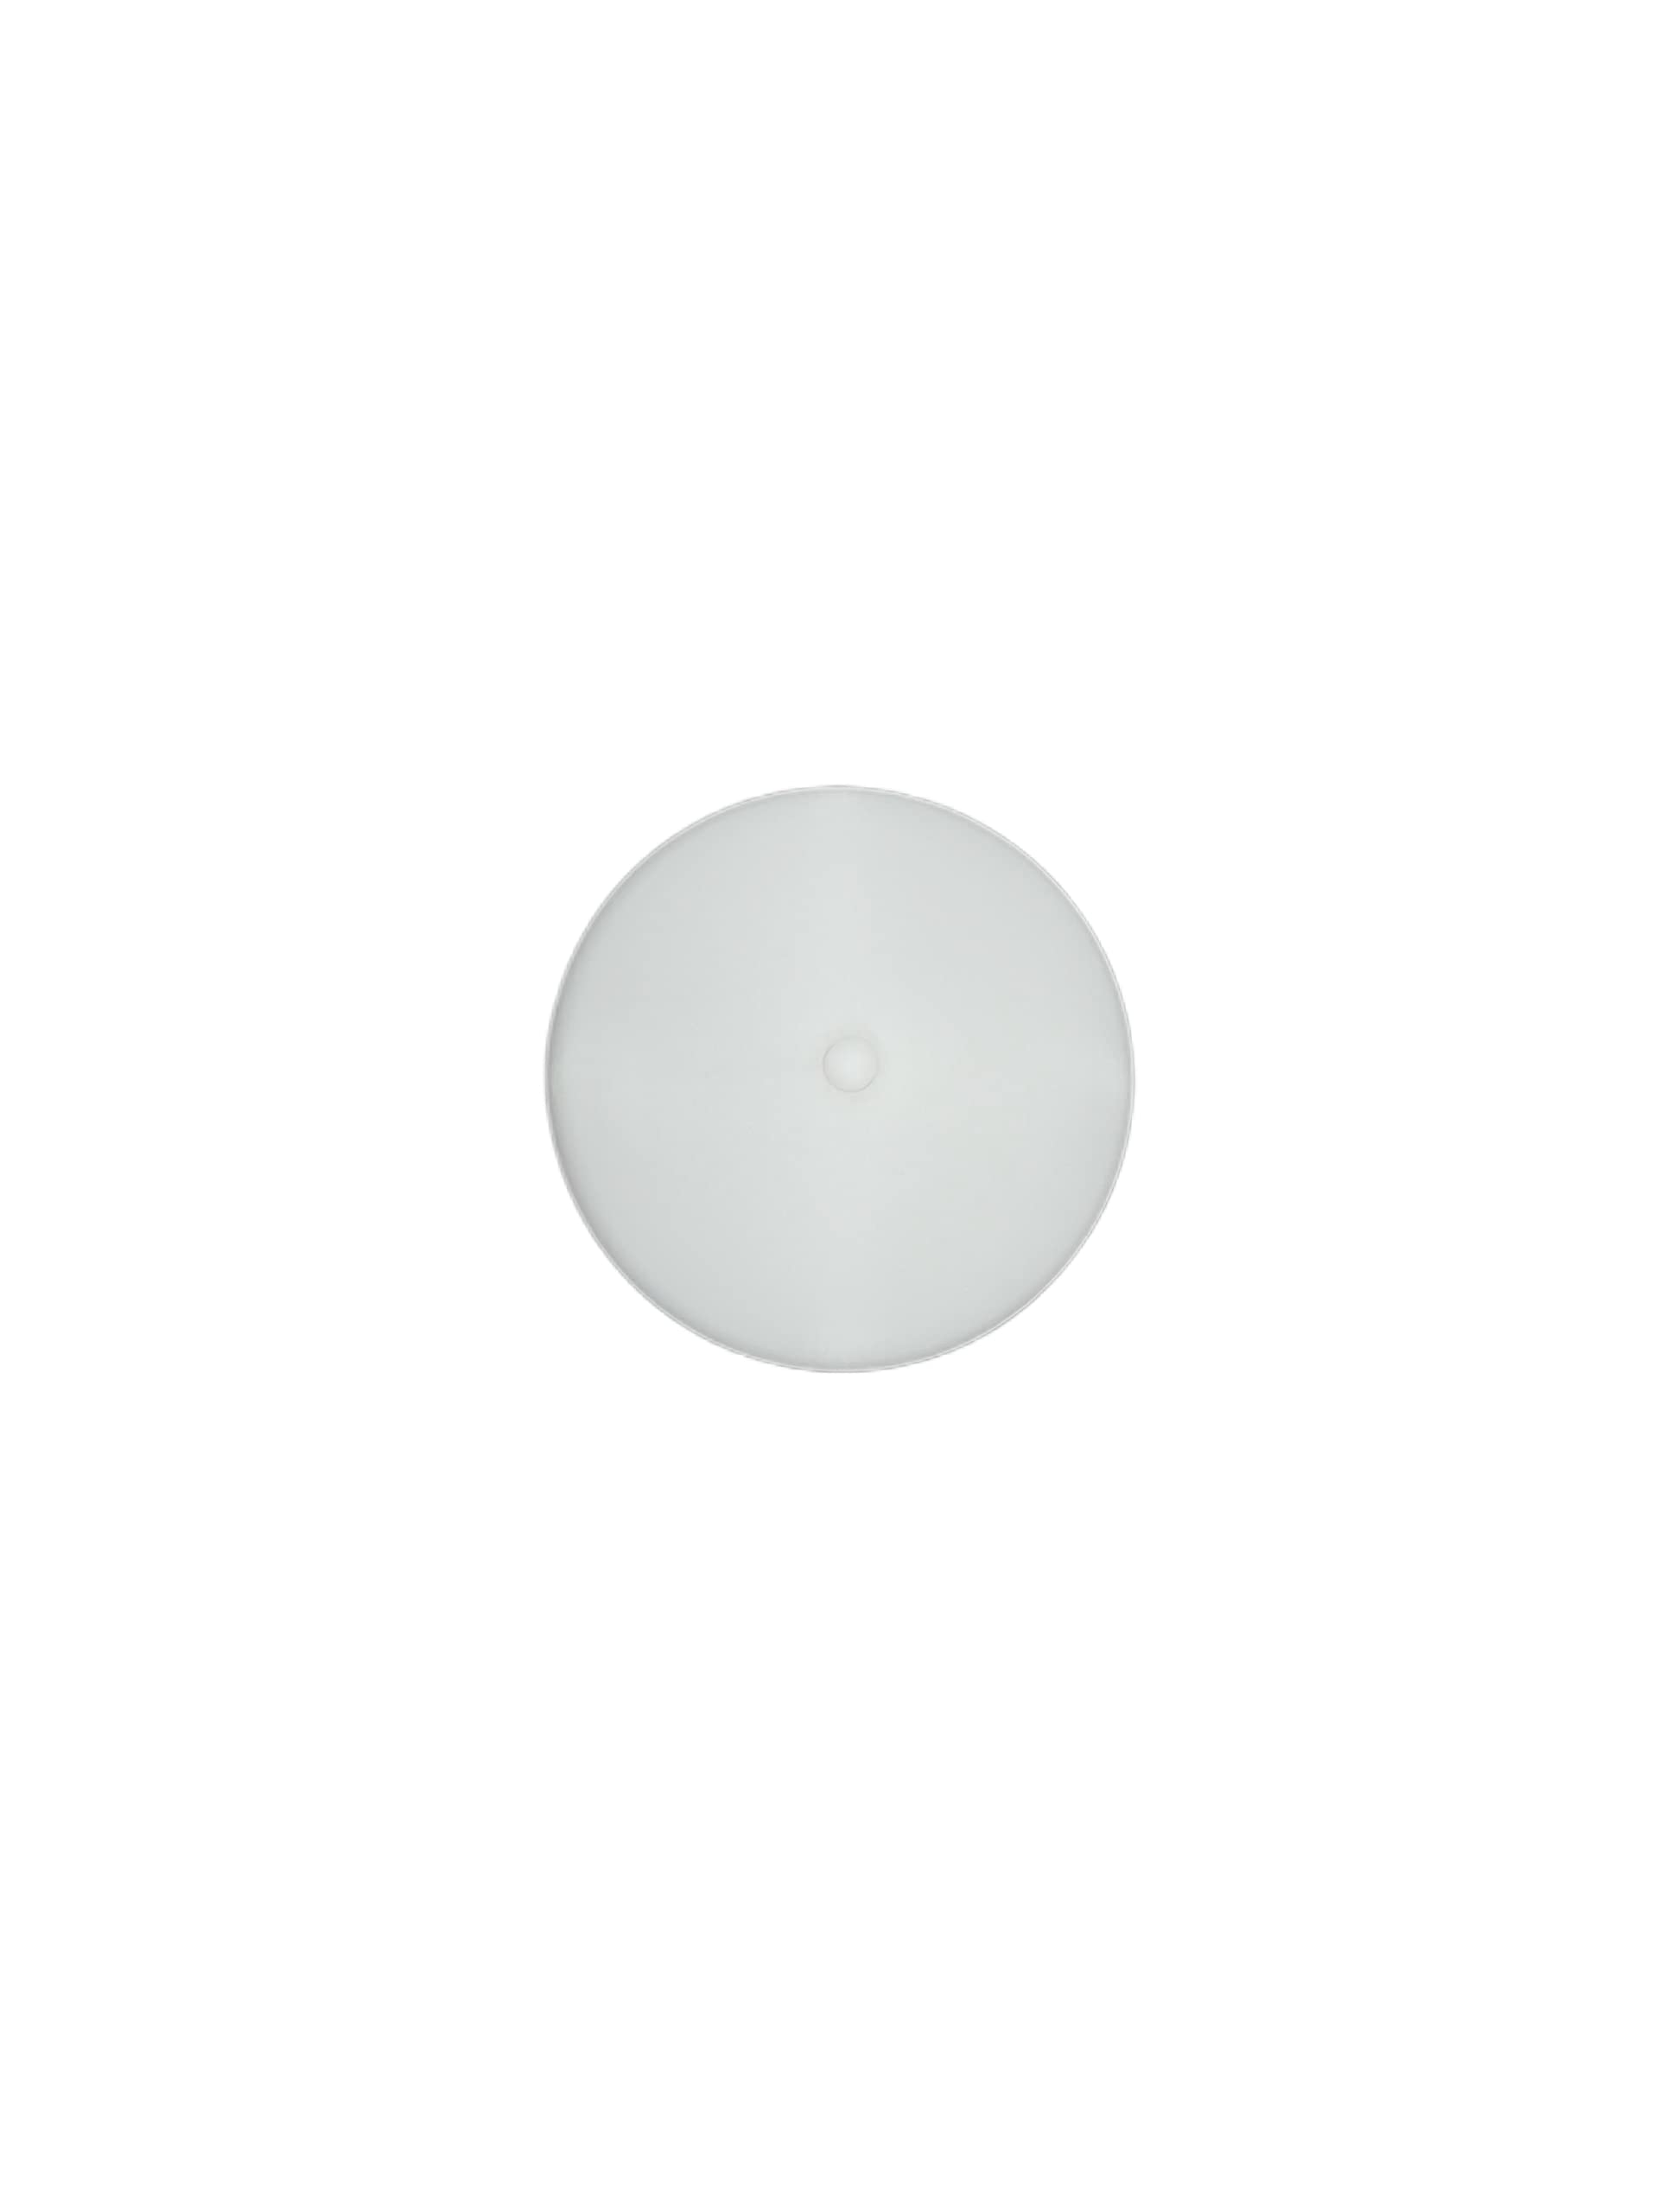 LED 12V PUCK LIGHT 3.5IN W/SWITCH